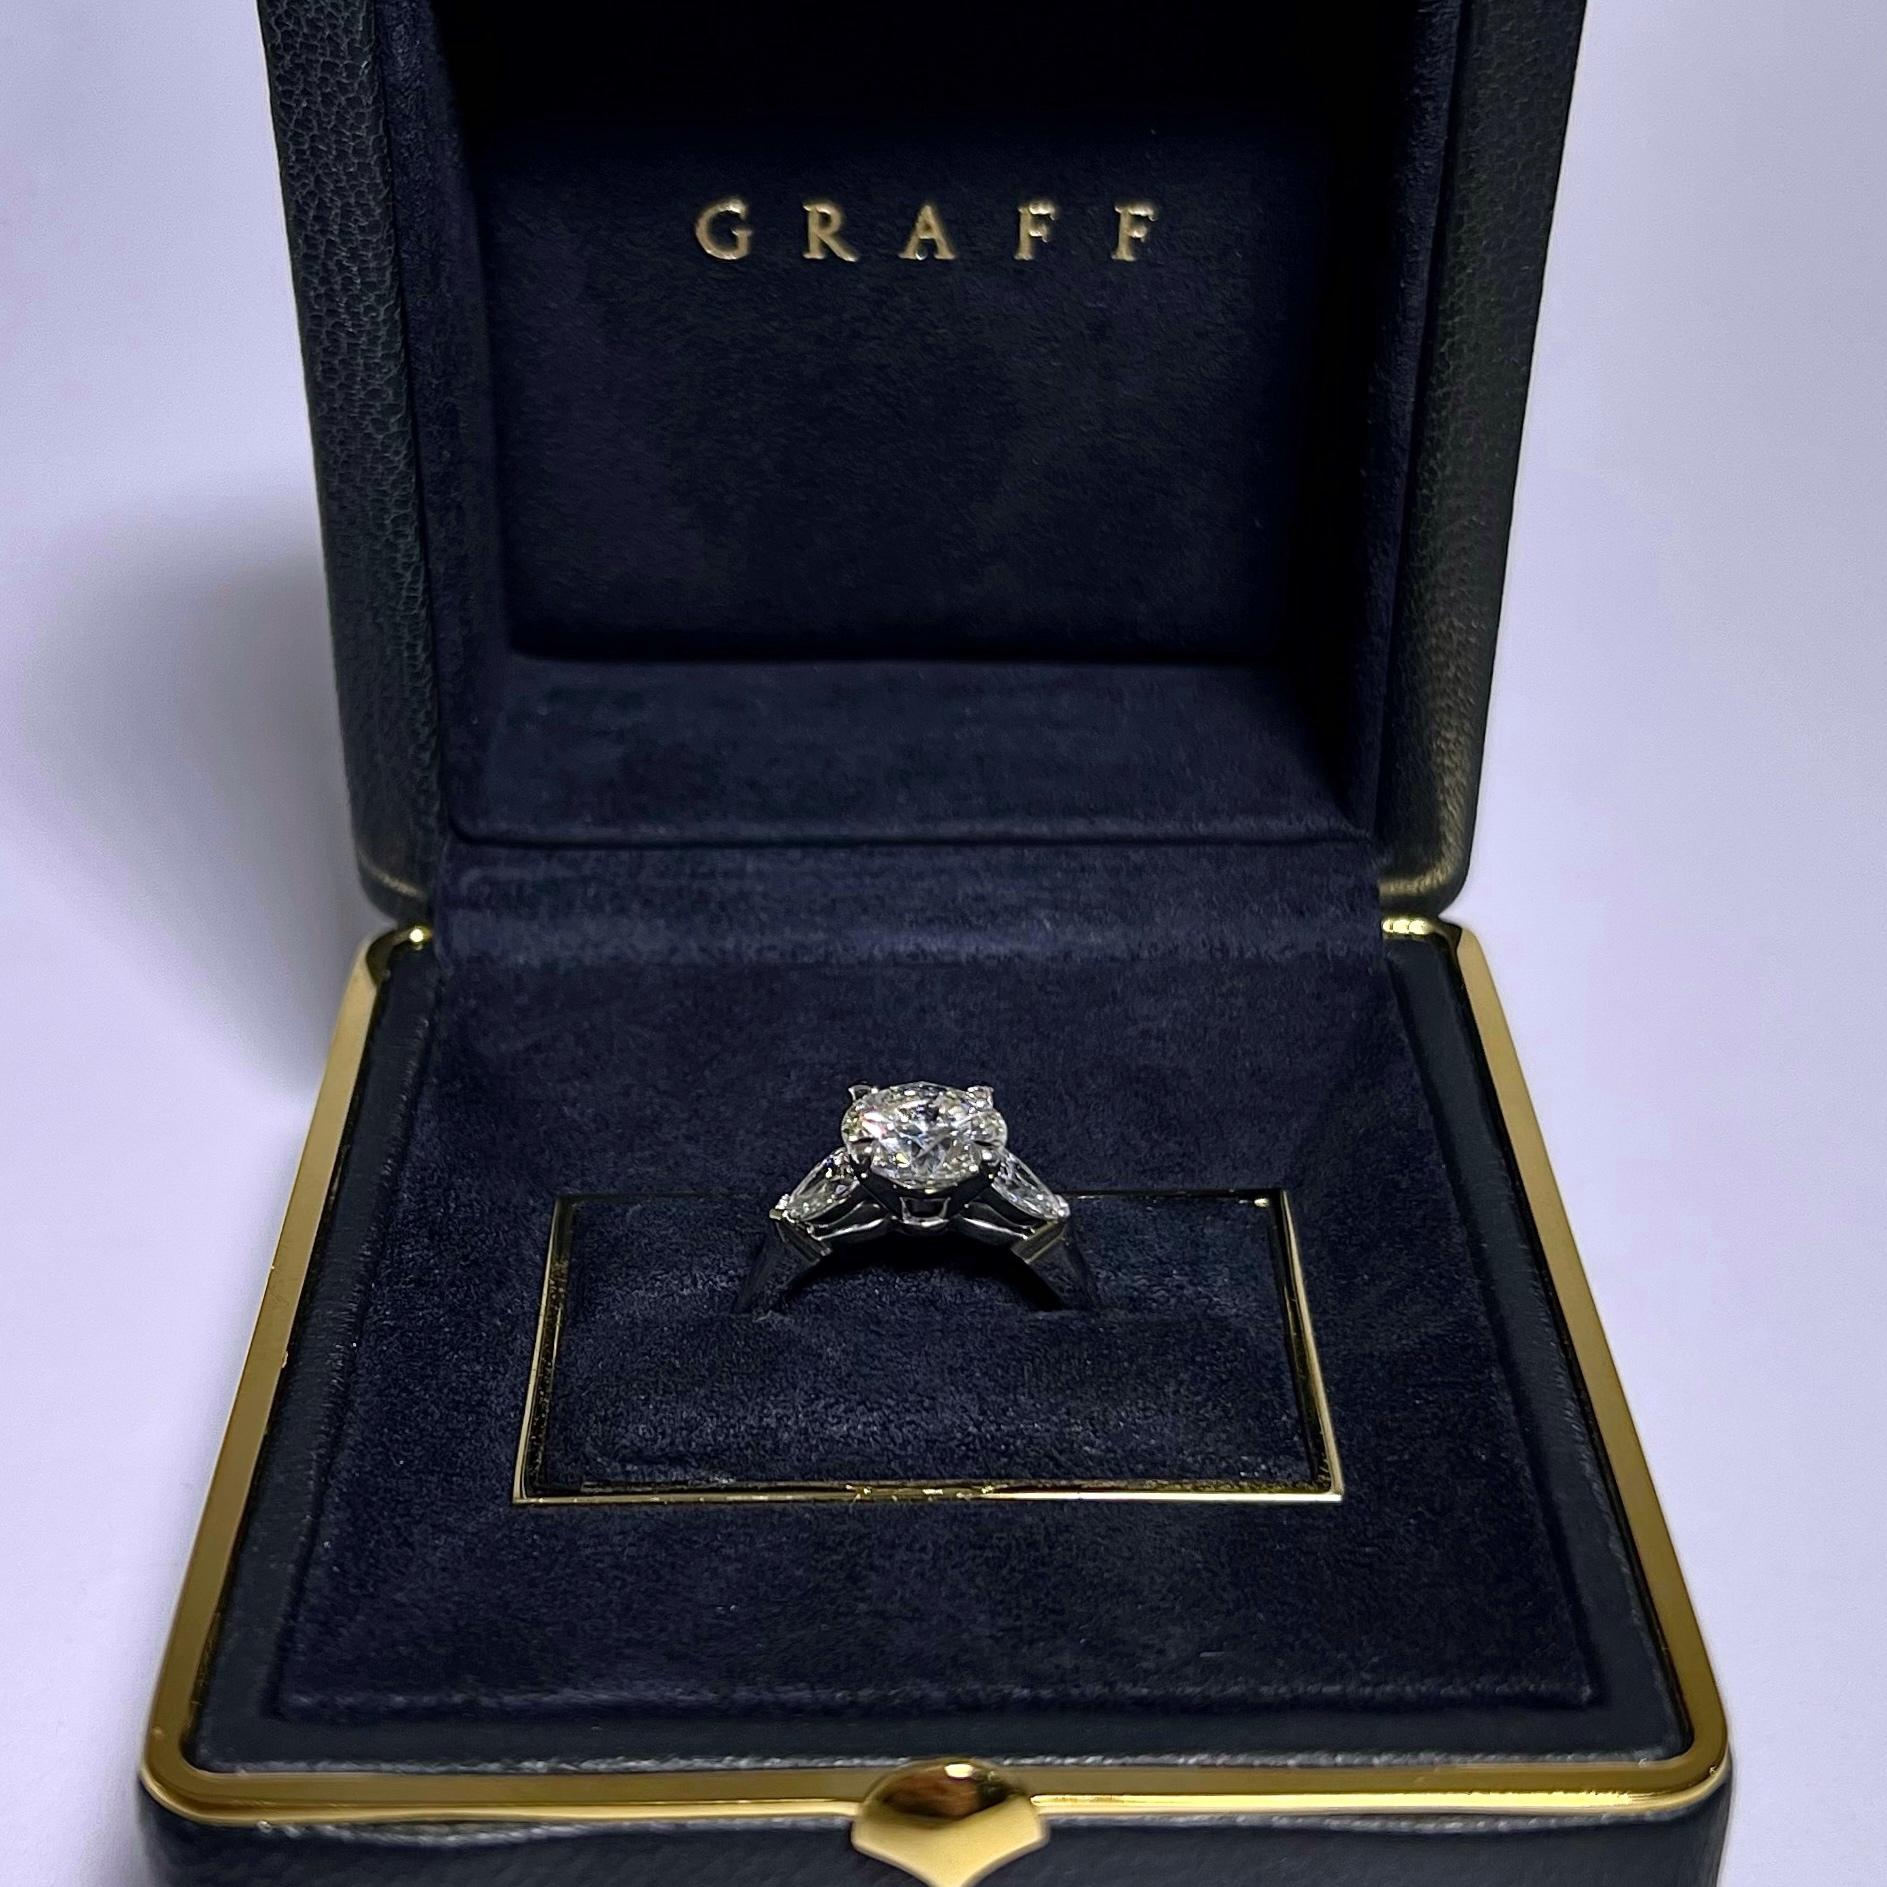 Exceptional 2.34 Carat GIA Certified Diamond Ring in Platinum by Graff For Sale 3